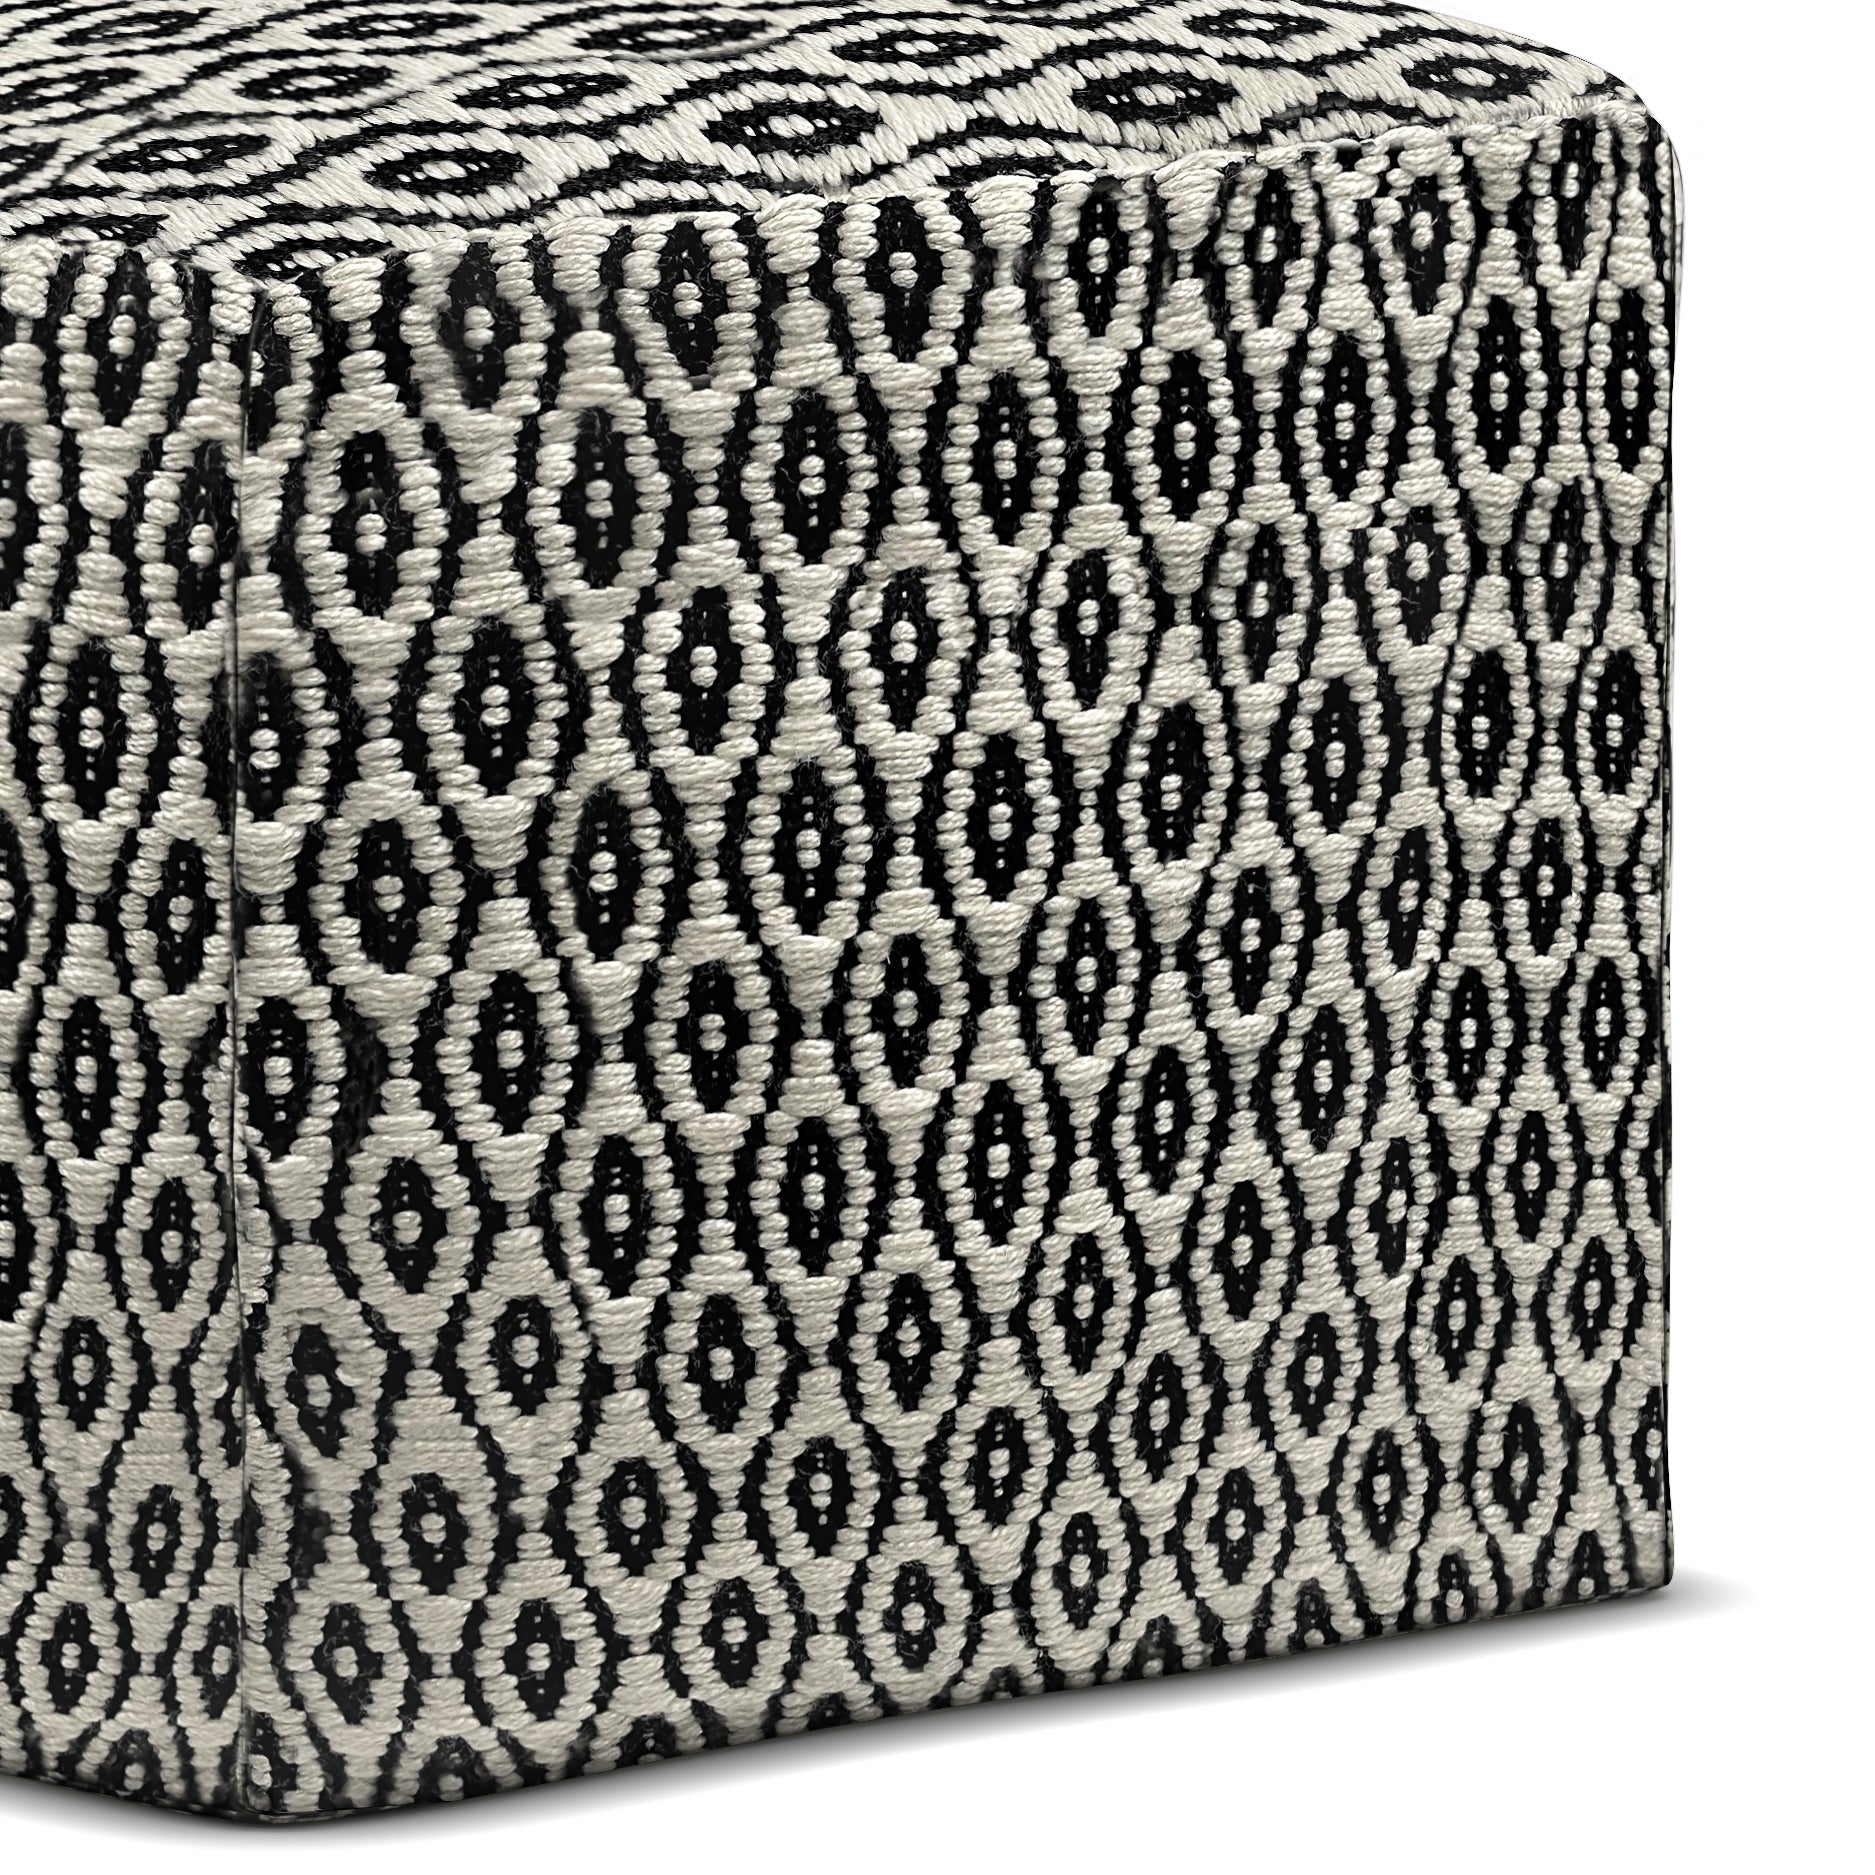 Outdoor Square Woven Pouf with Geometric Pattern - Pouf